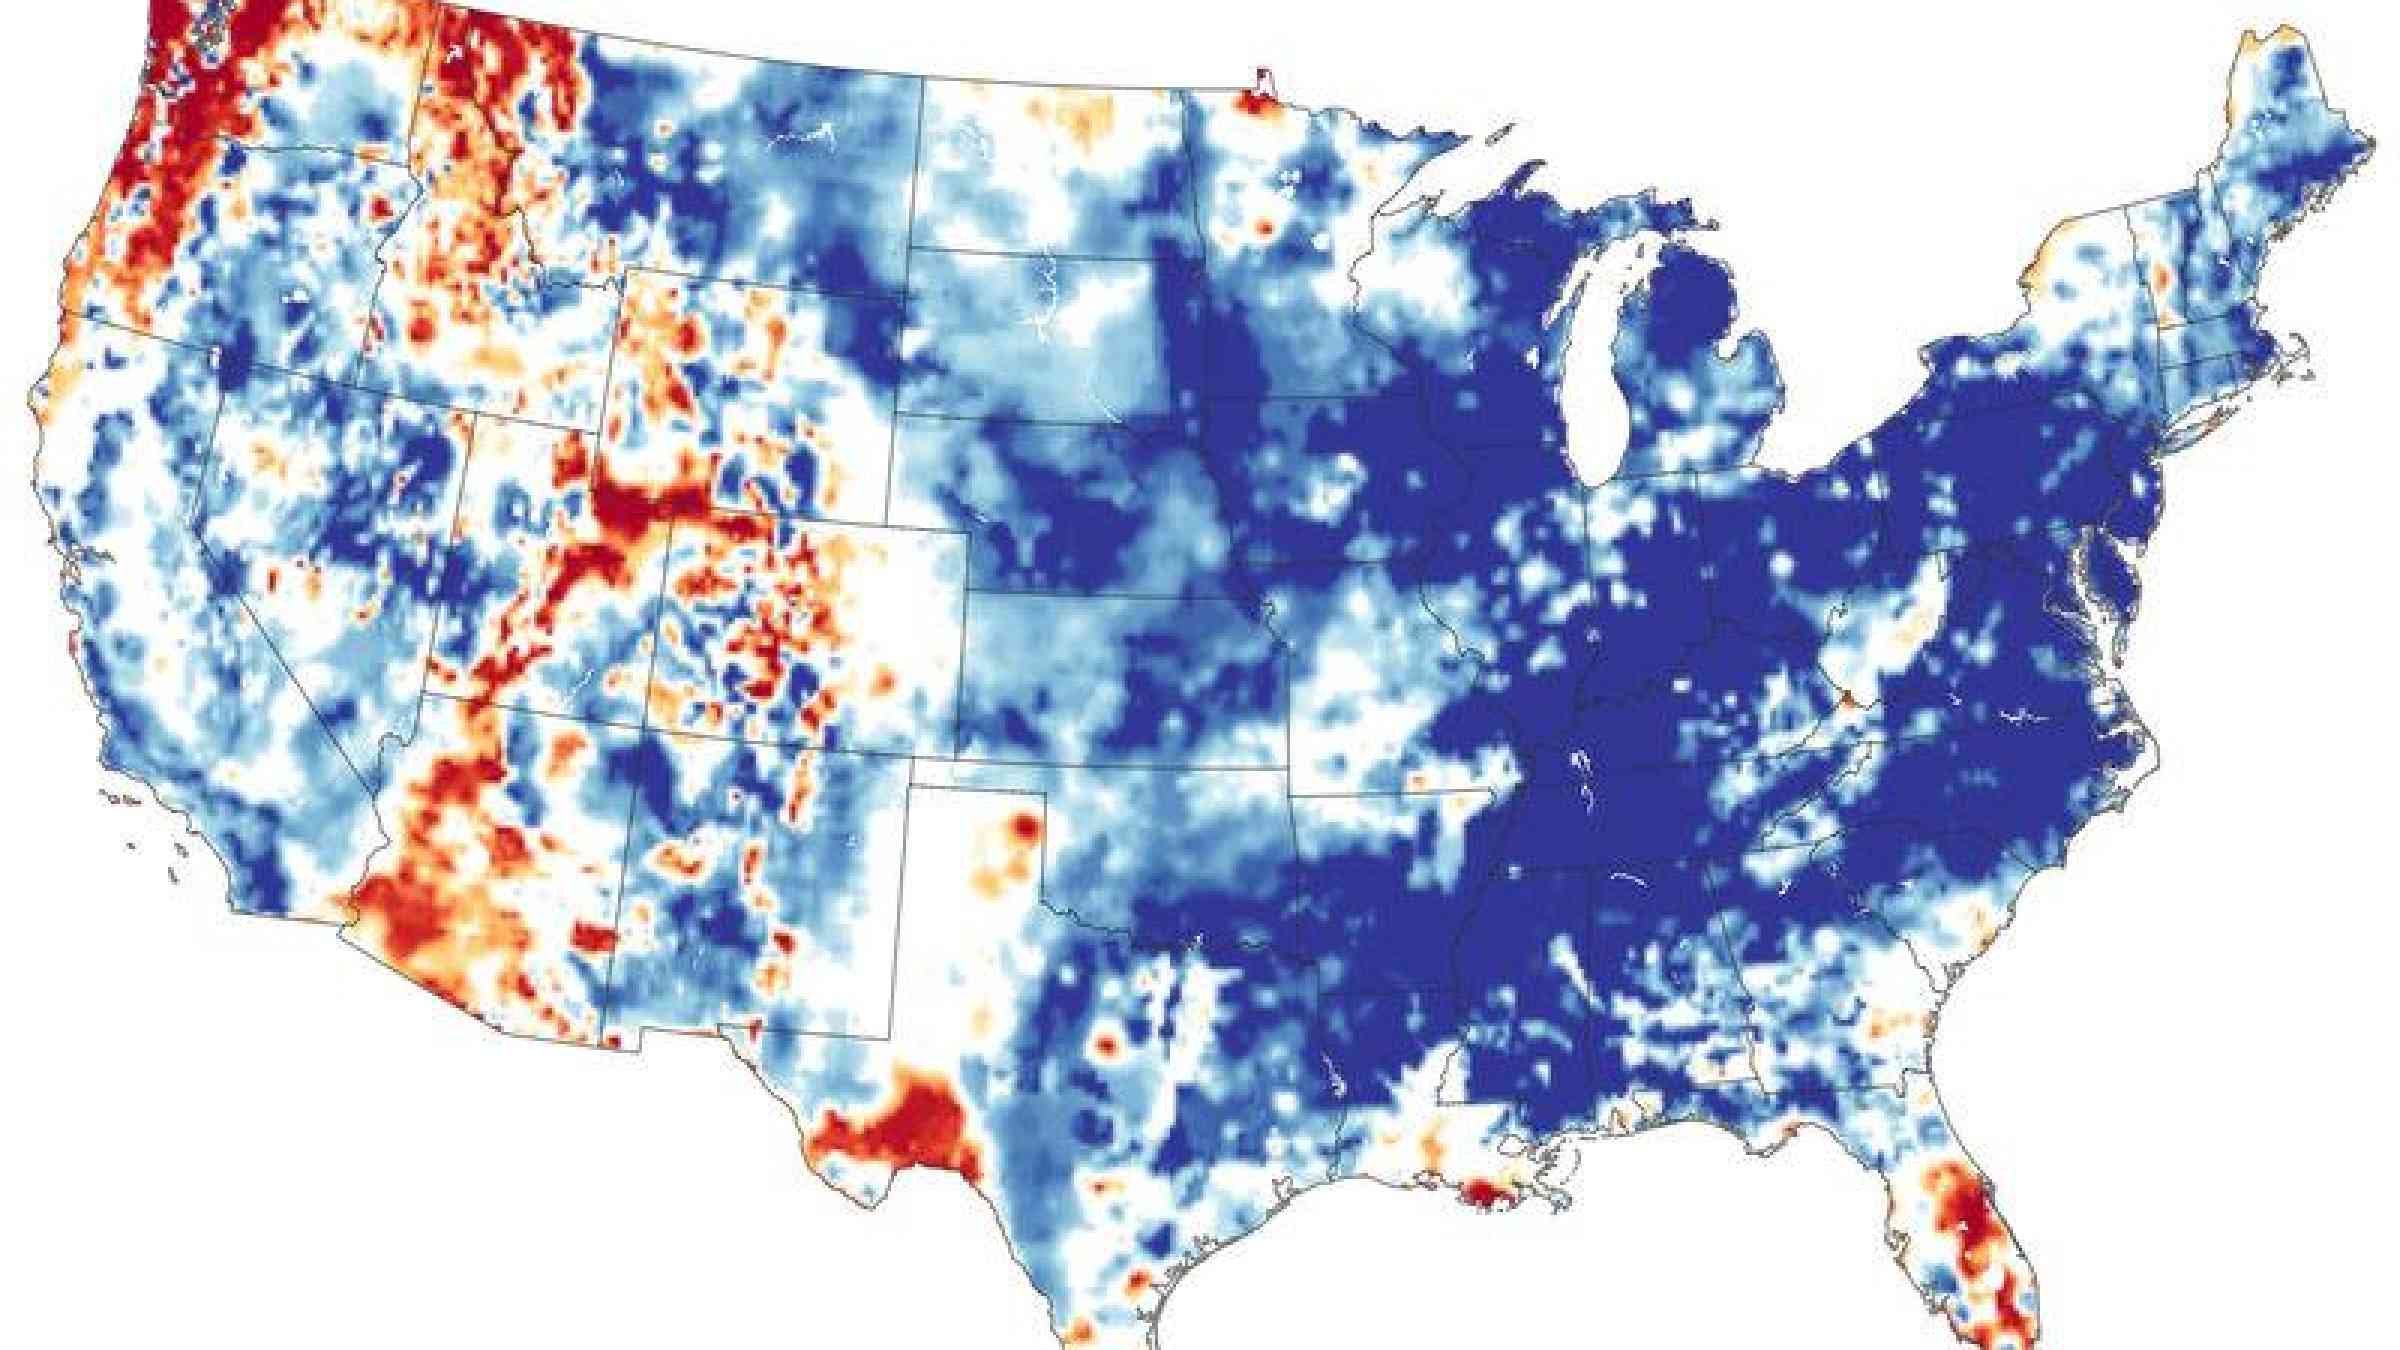 More precipitation fell in the continental U.S. in the 12 months ending in May 2019 than ever recorded. Records go back more than 120 years. Blue areas had more groundwater than usual for May. Orange and red areas had less. Source: NASA Earth Observatory